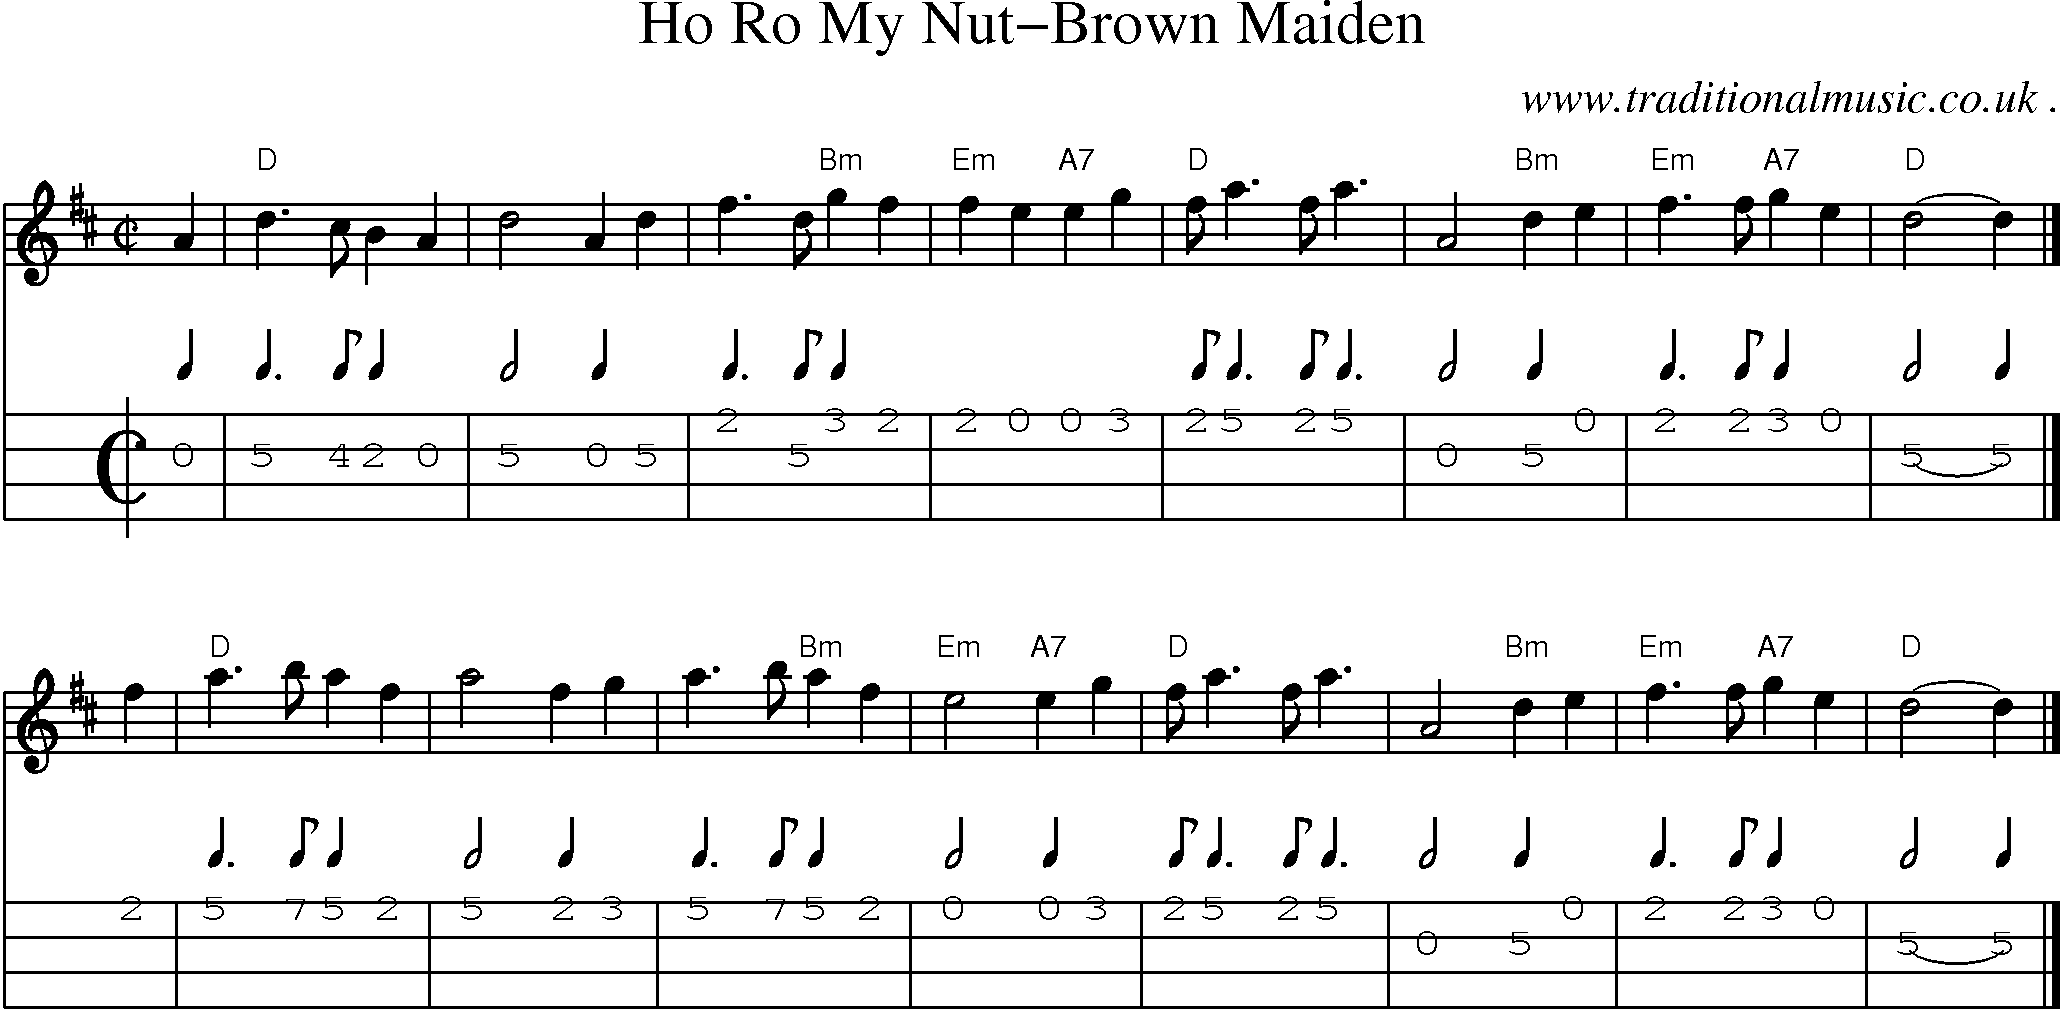 Sheet-music  score, Chords and Mandolin Tabs for Ho Ro My Nut-brown Maiden